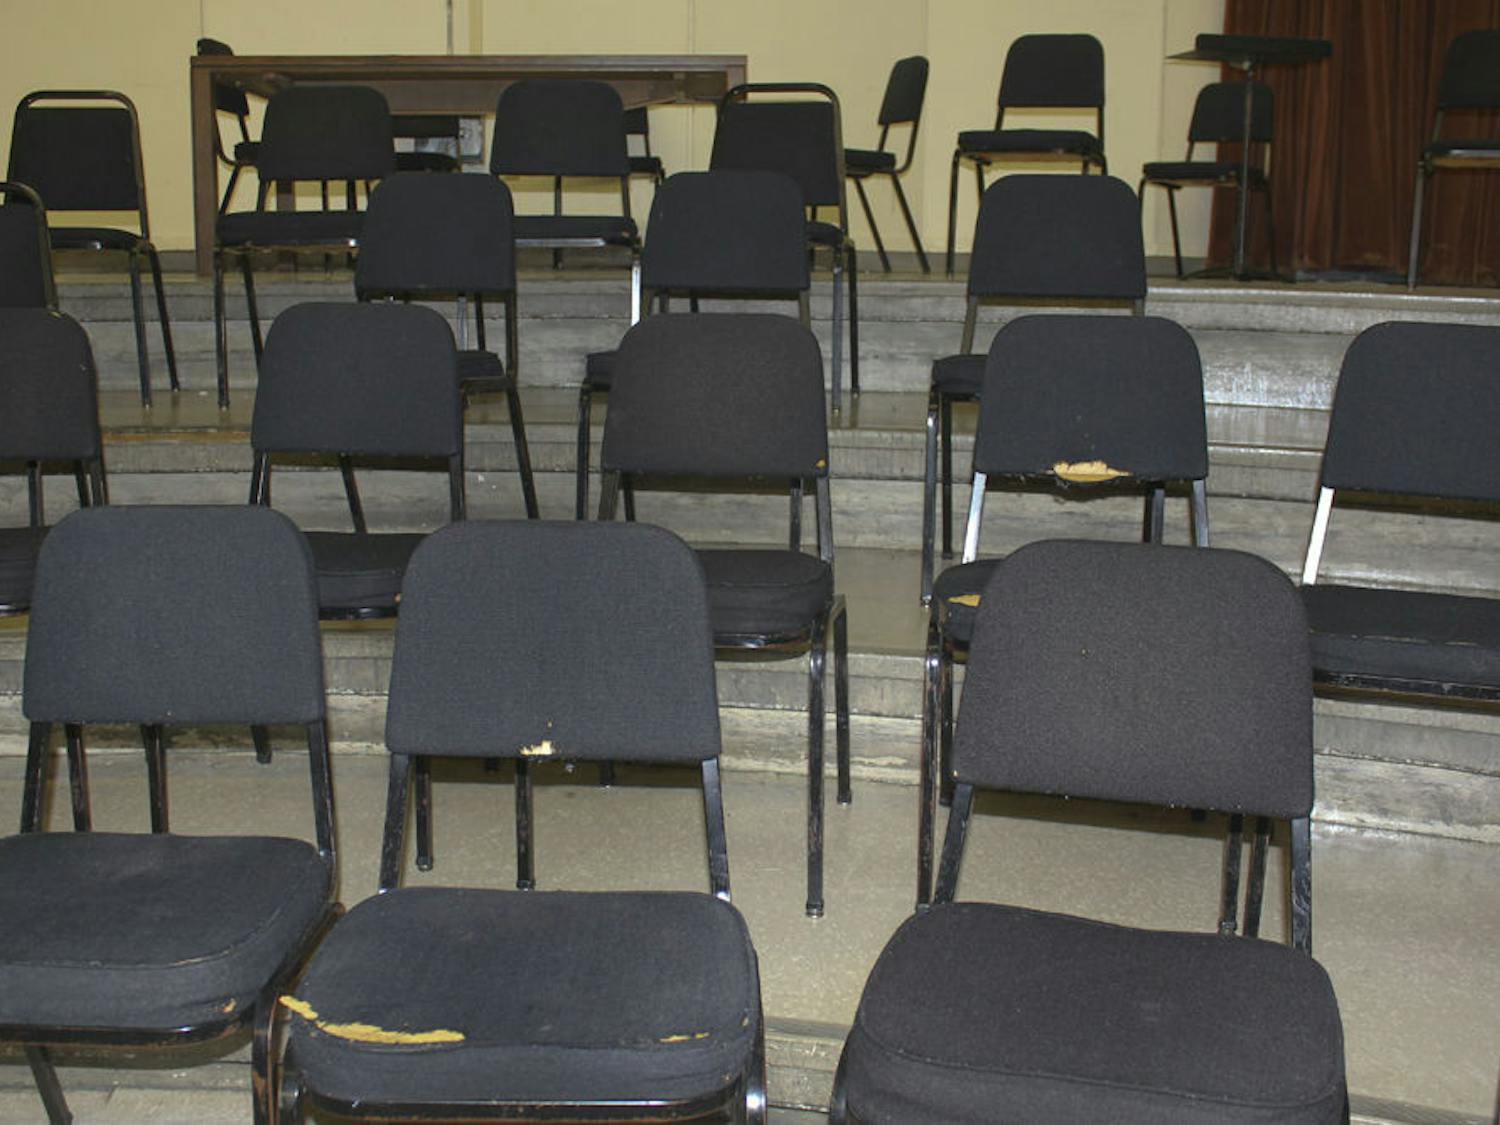 Some of these chairs have been in the building since it first opened as the College of the Fine Arts in 1943. Torn and leaking cushion foam, they are still used for lectures and recitals.